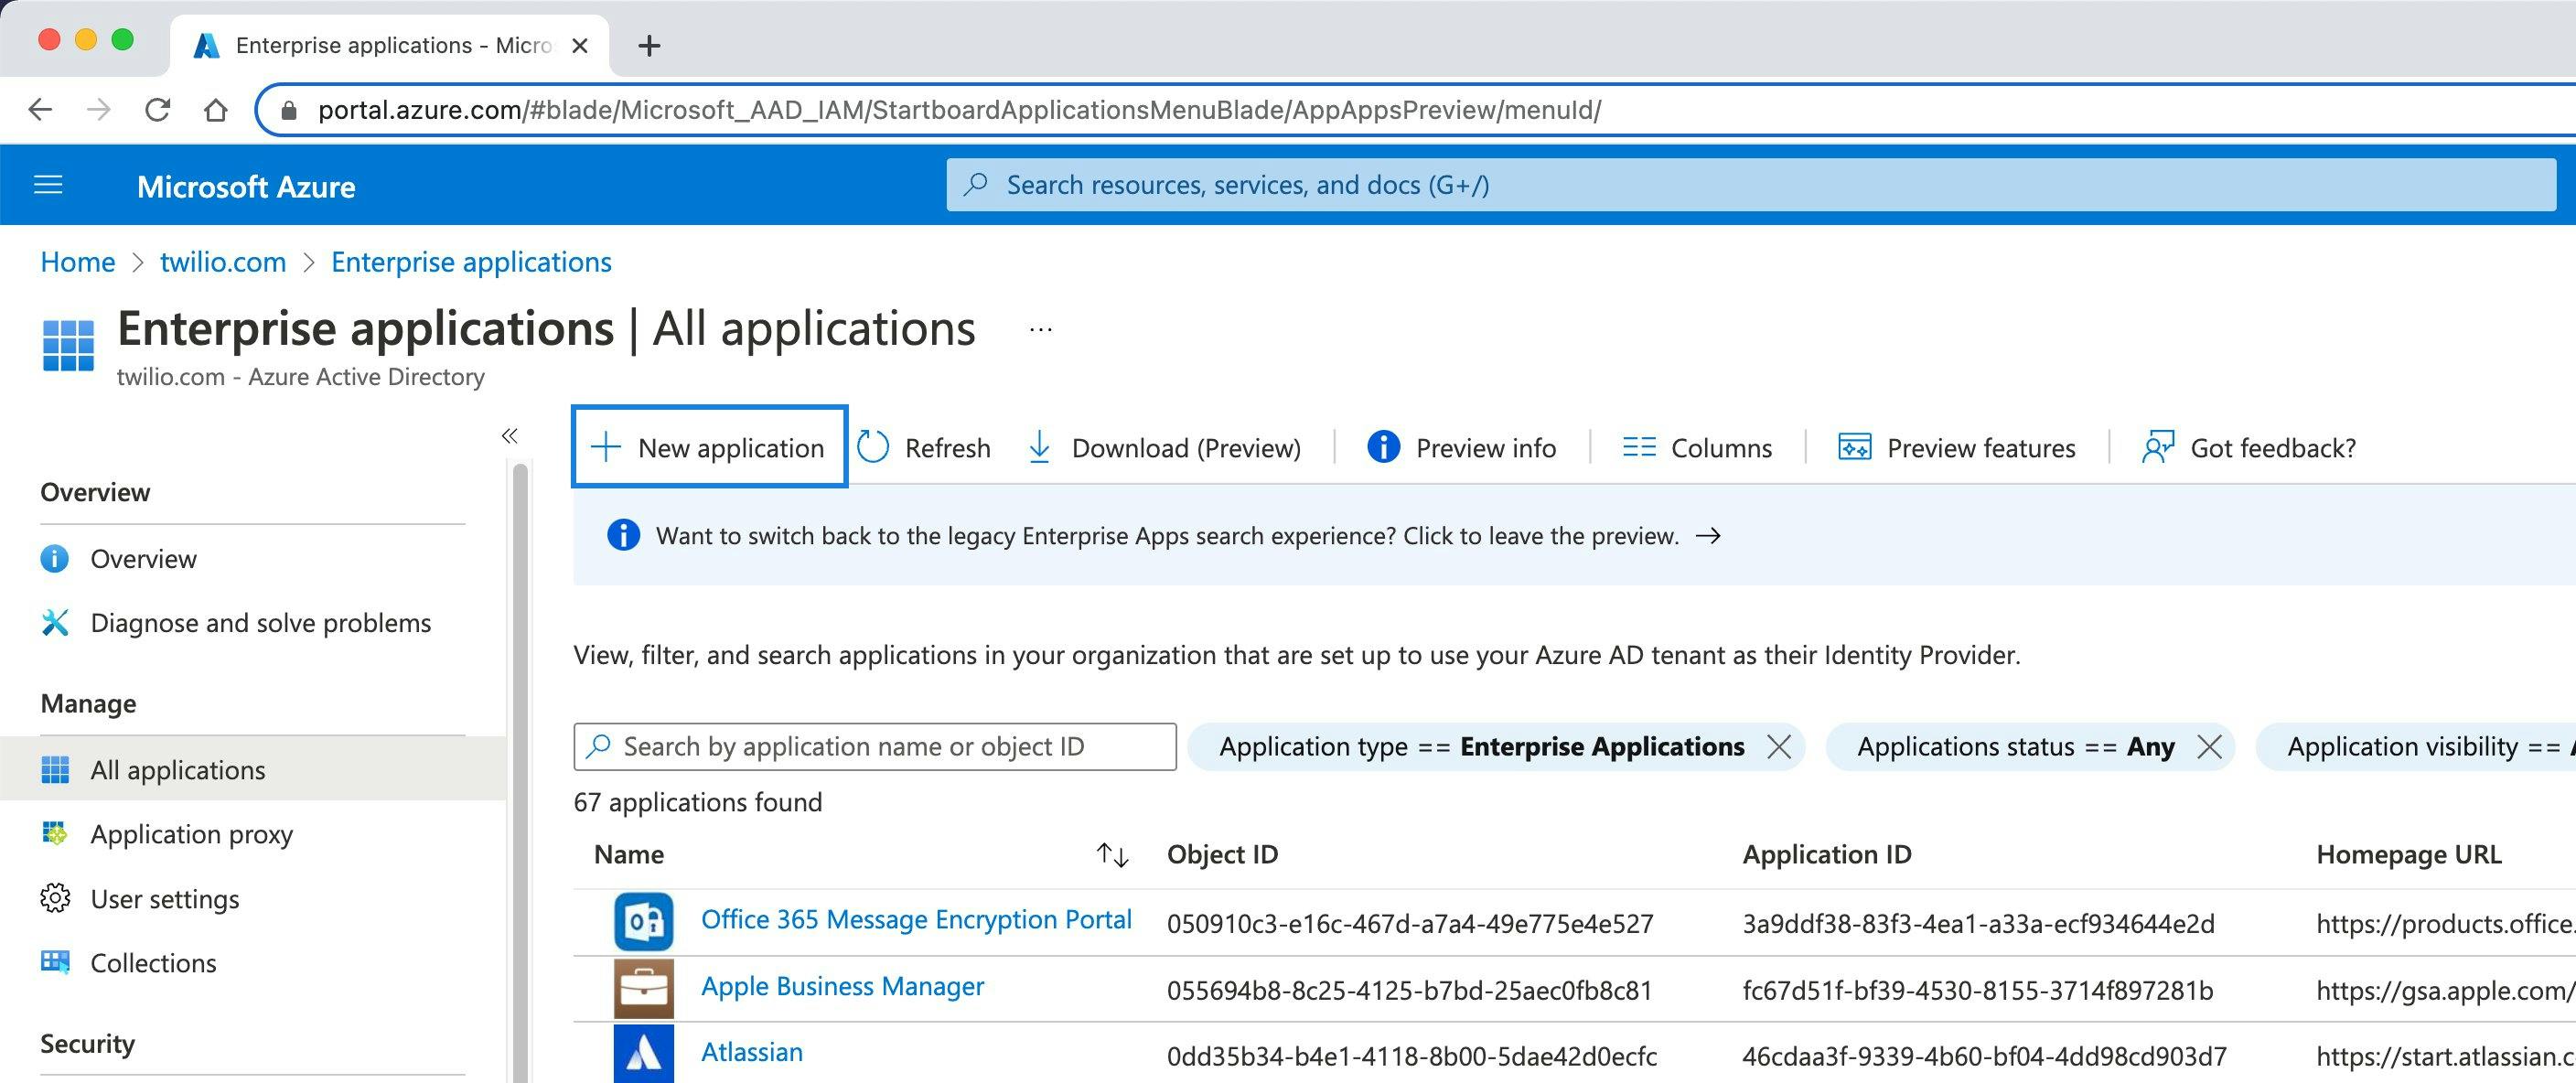 Add a new application to Azure AD.